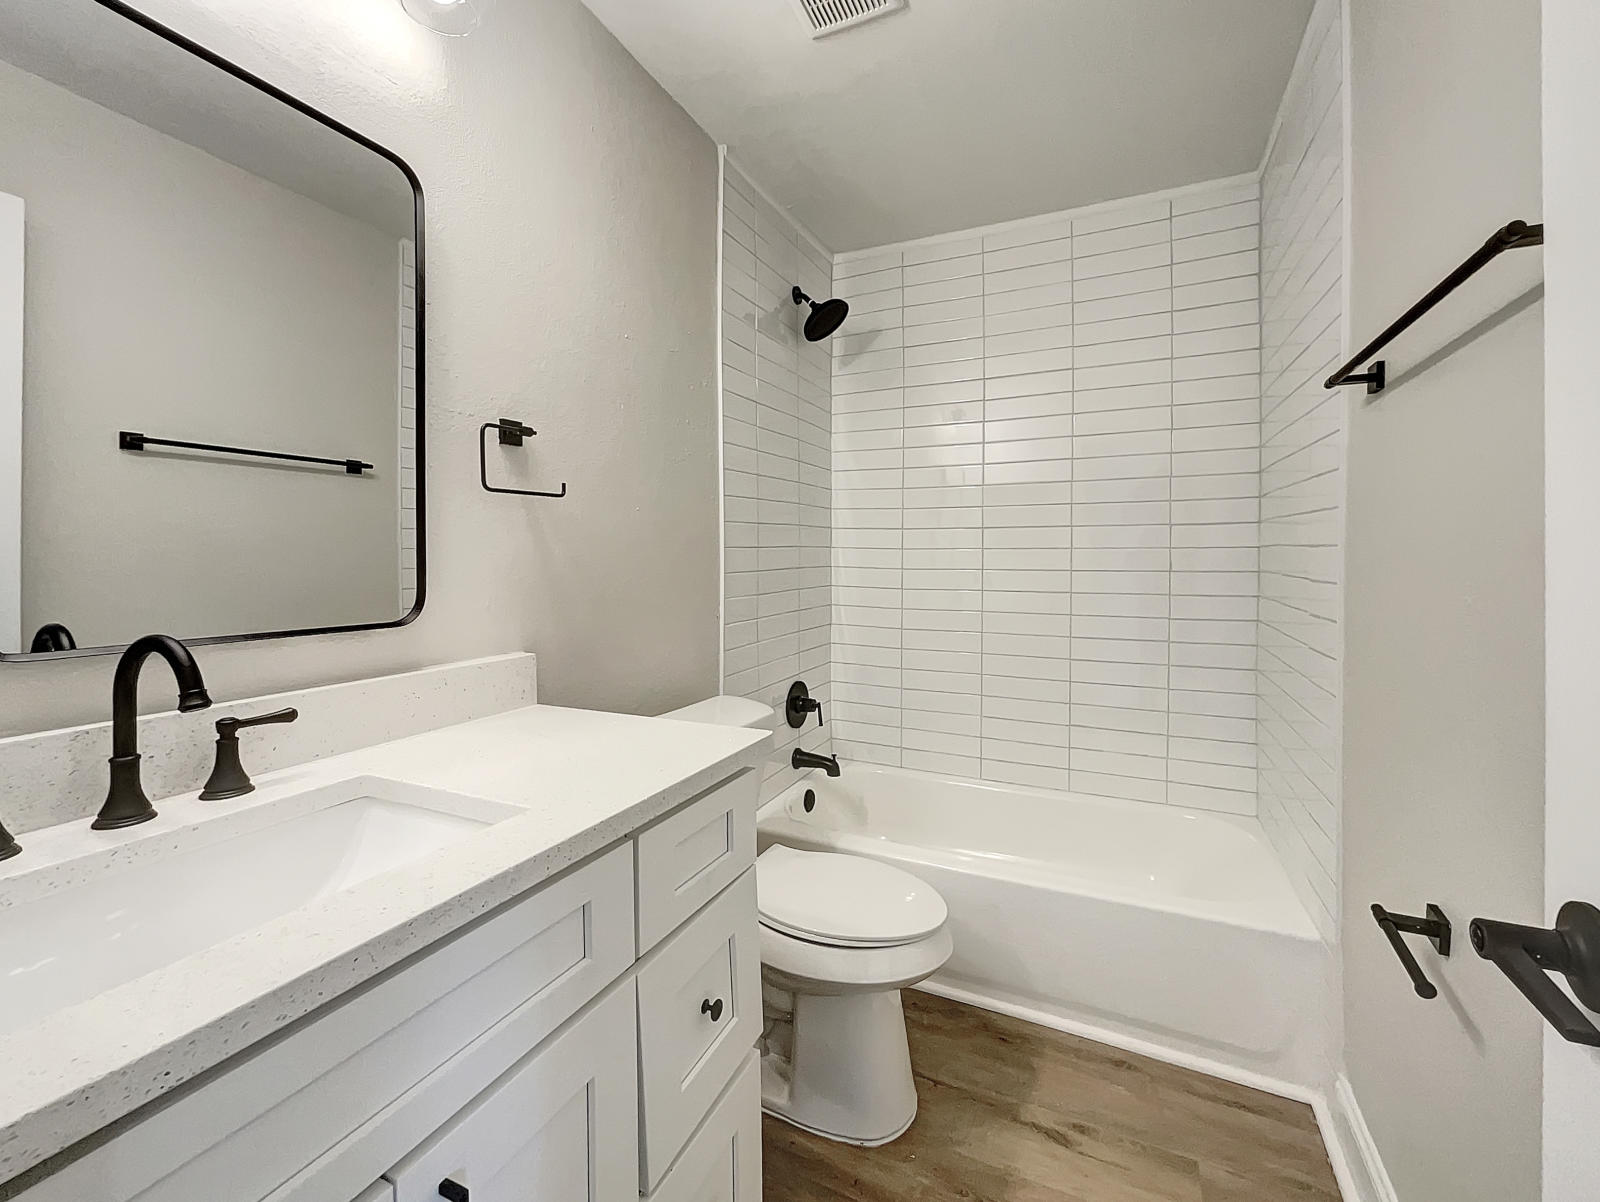 This bathroom in Tampa is brightened up with luxury-vinyl plank floors, white subway shower tile, and matte black faucets.